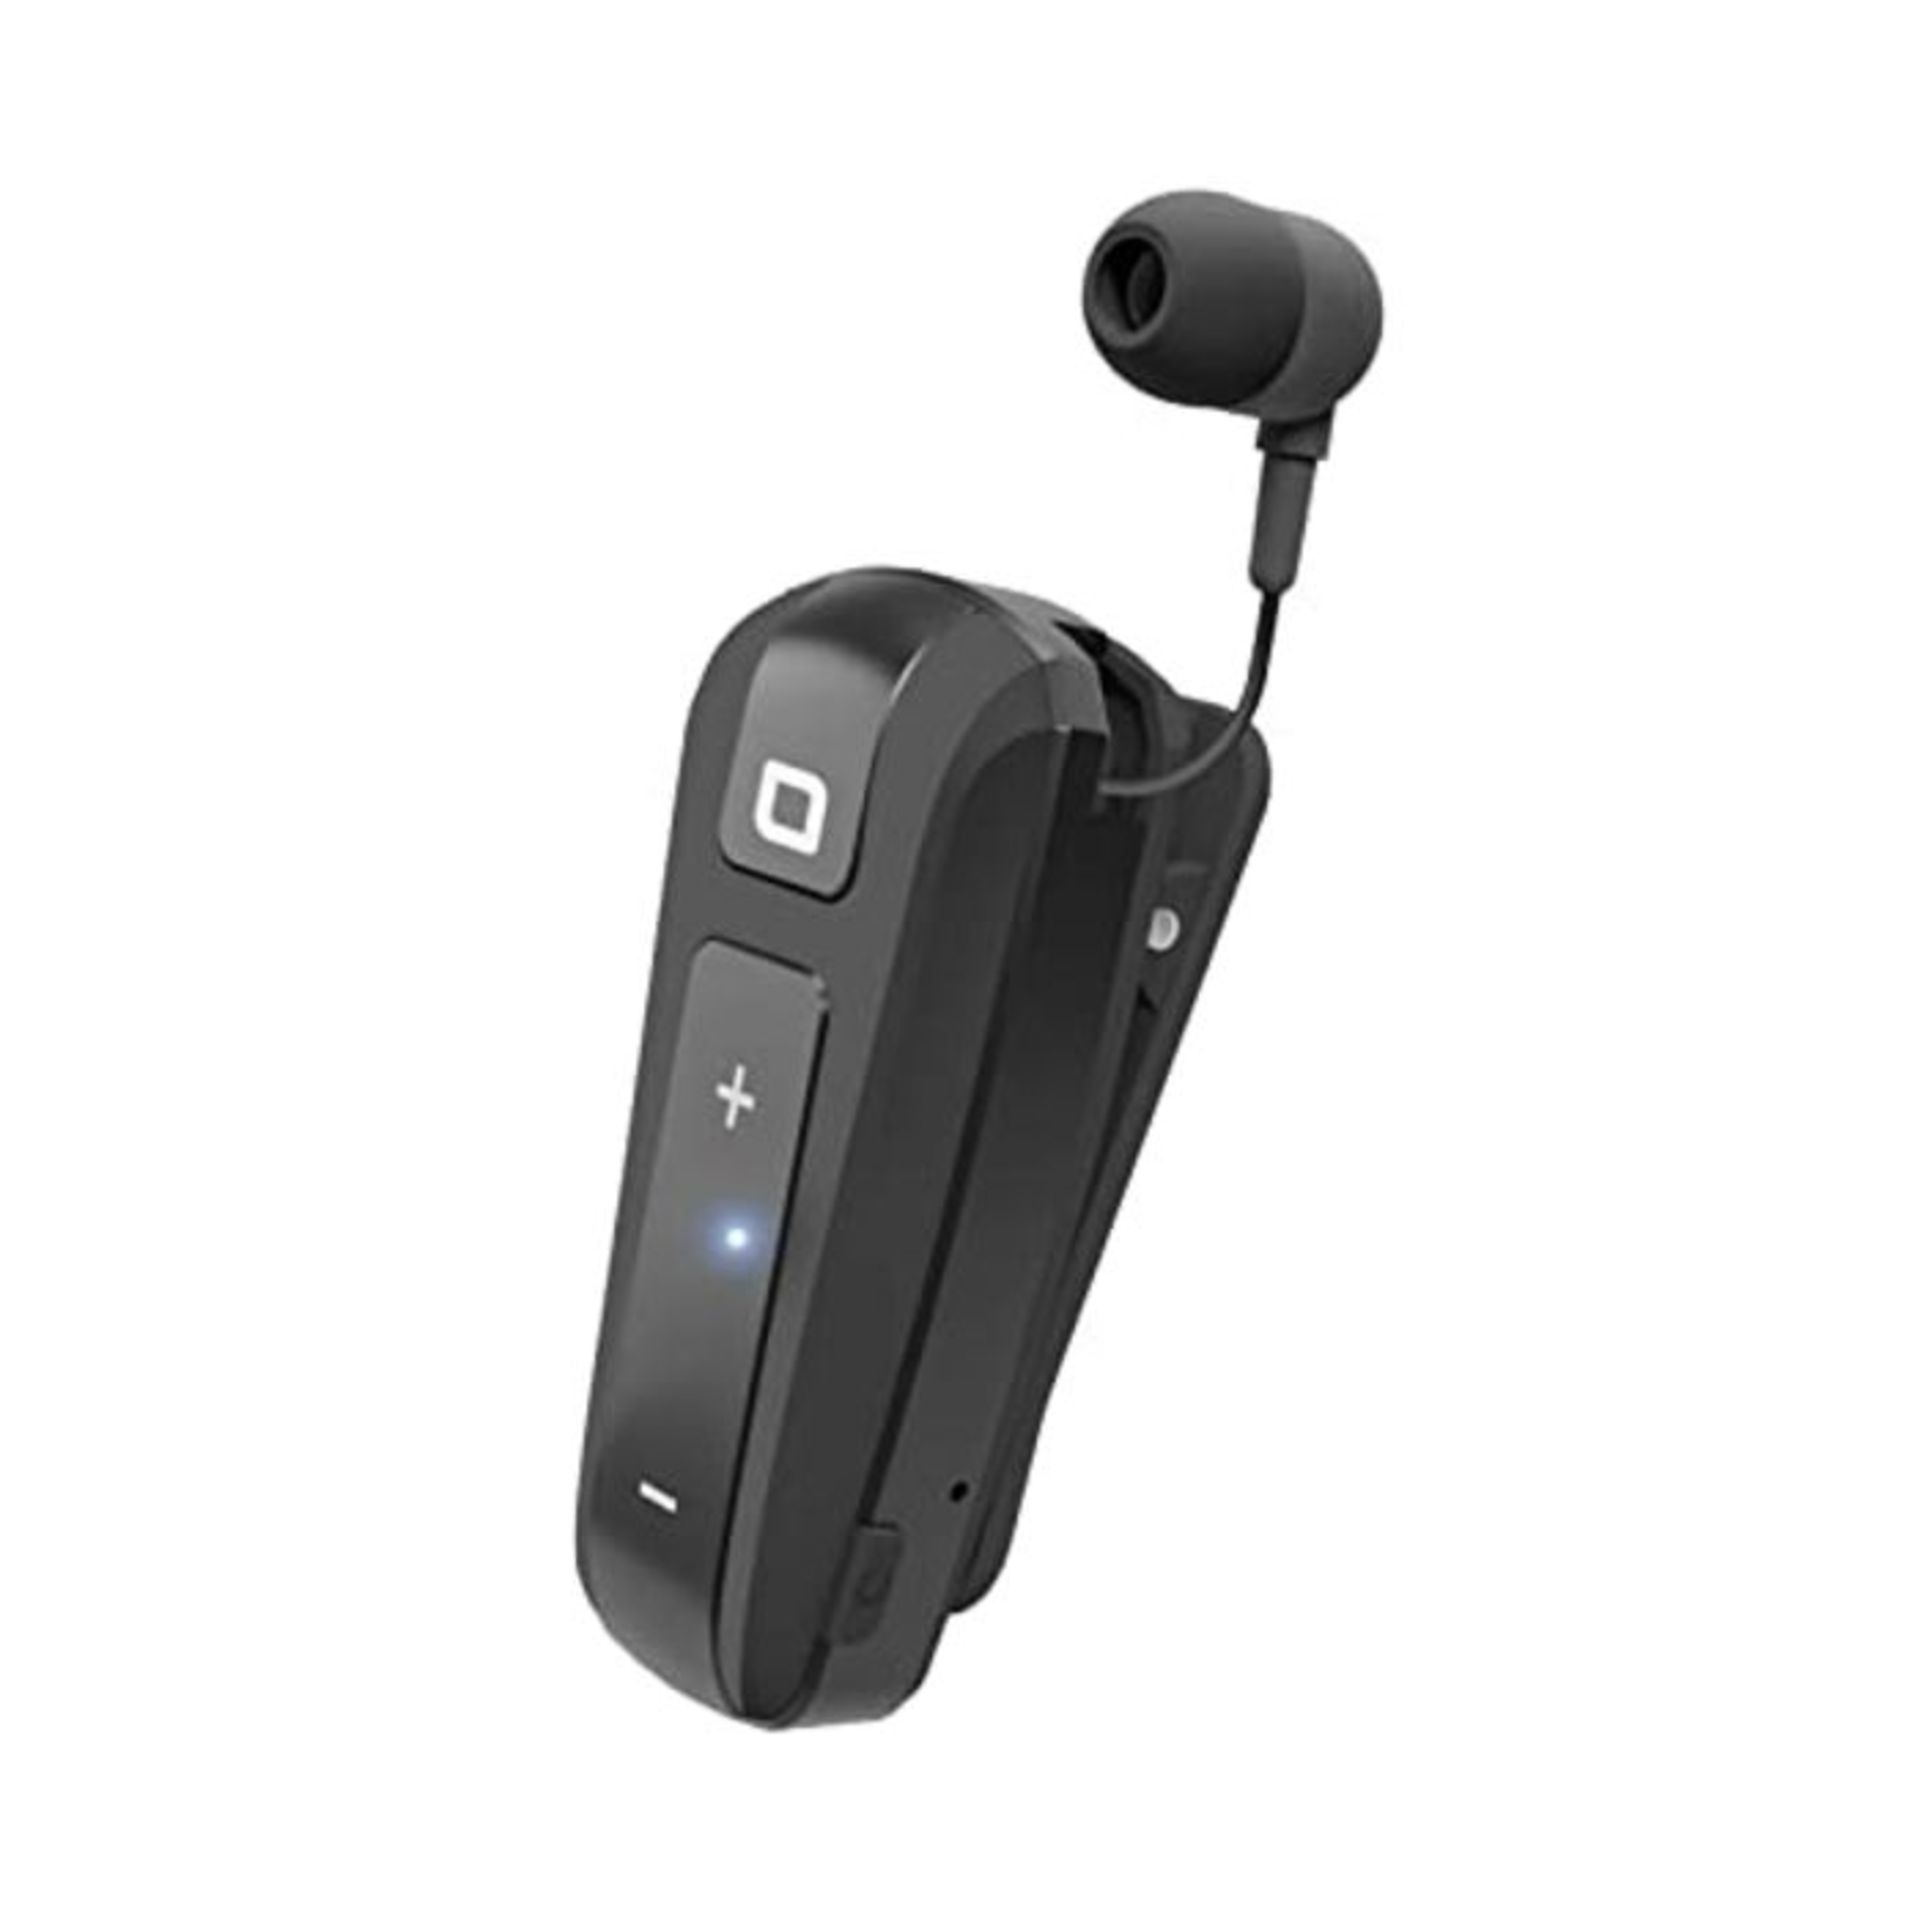 SBS Bluetooth Headset with Clip and Roll-up Wire Multipoint Technology to connect 2 de - Image 4 of 6